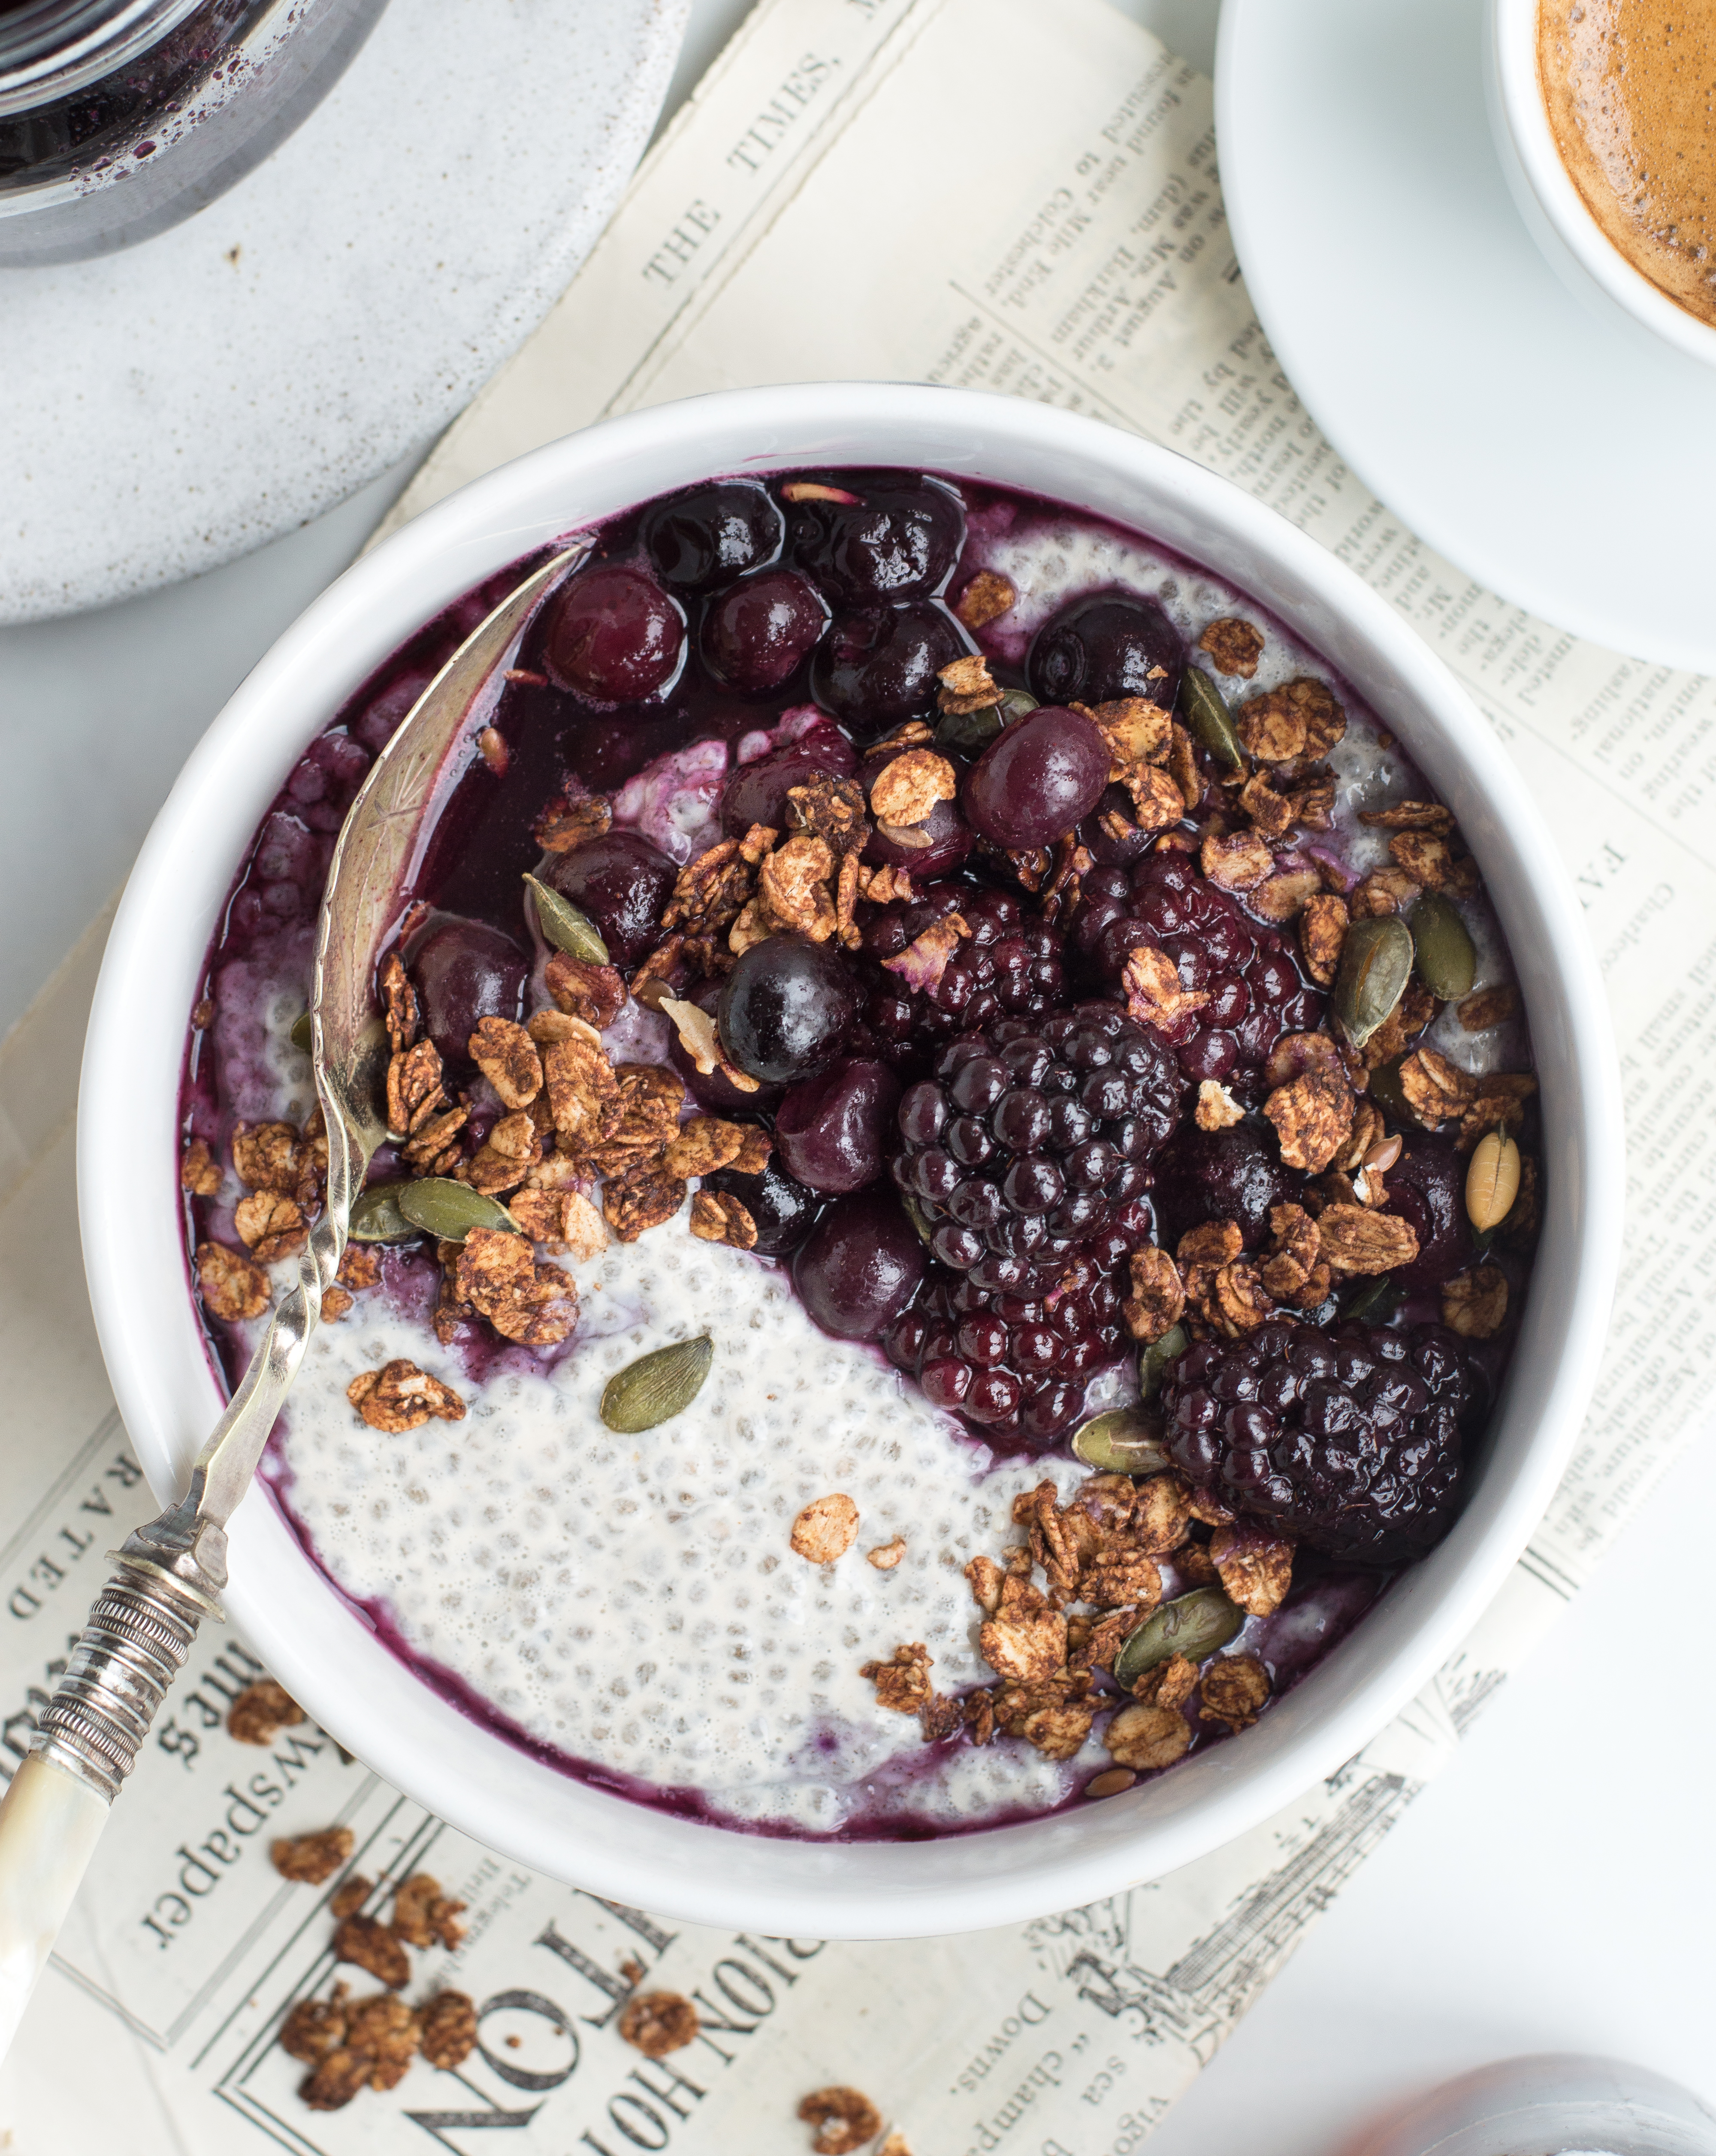 Chia pudding with berry compote & granola